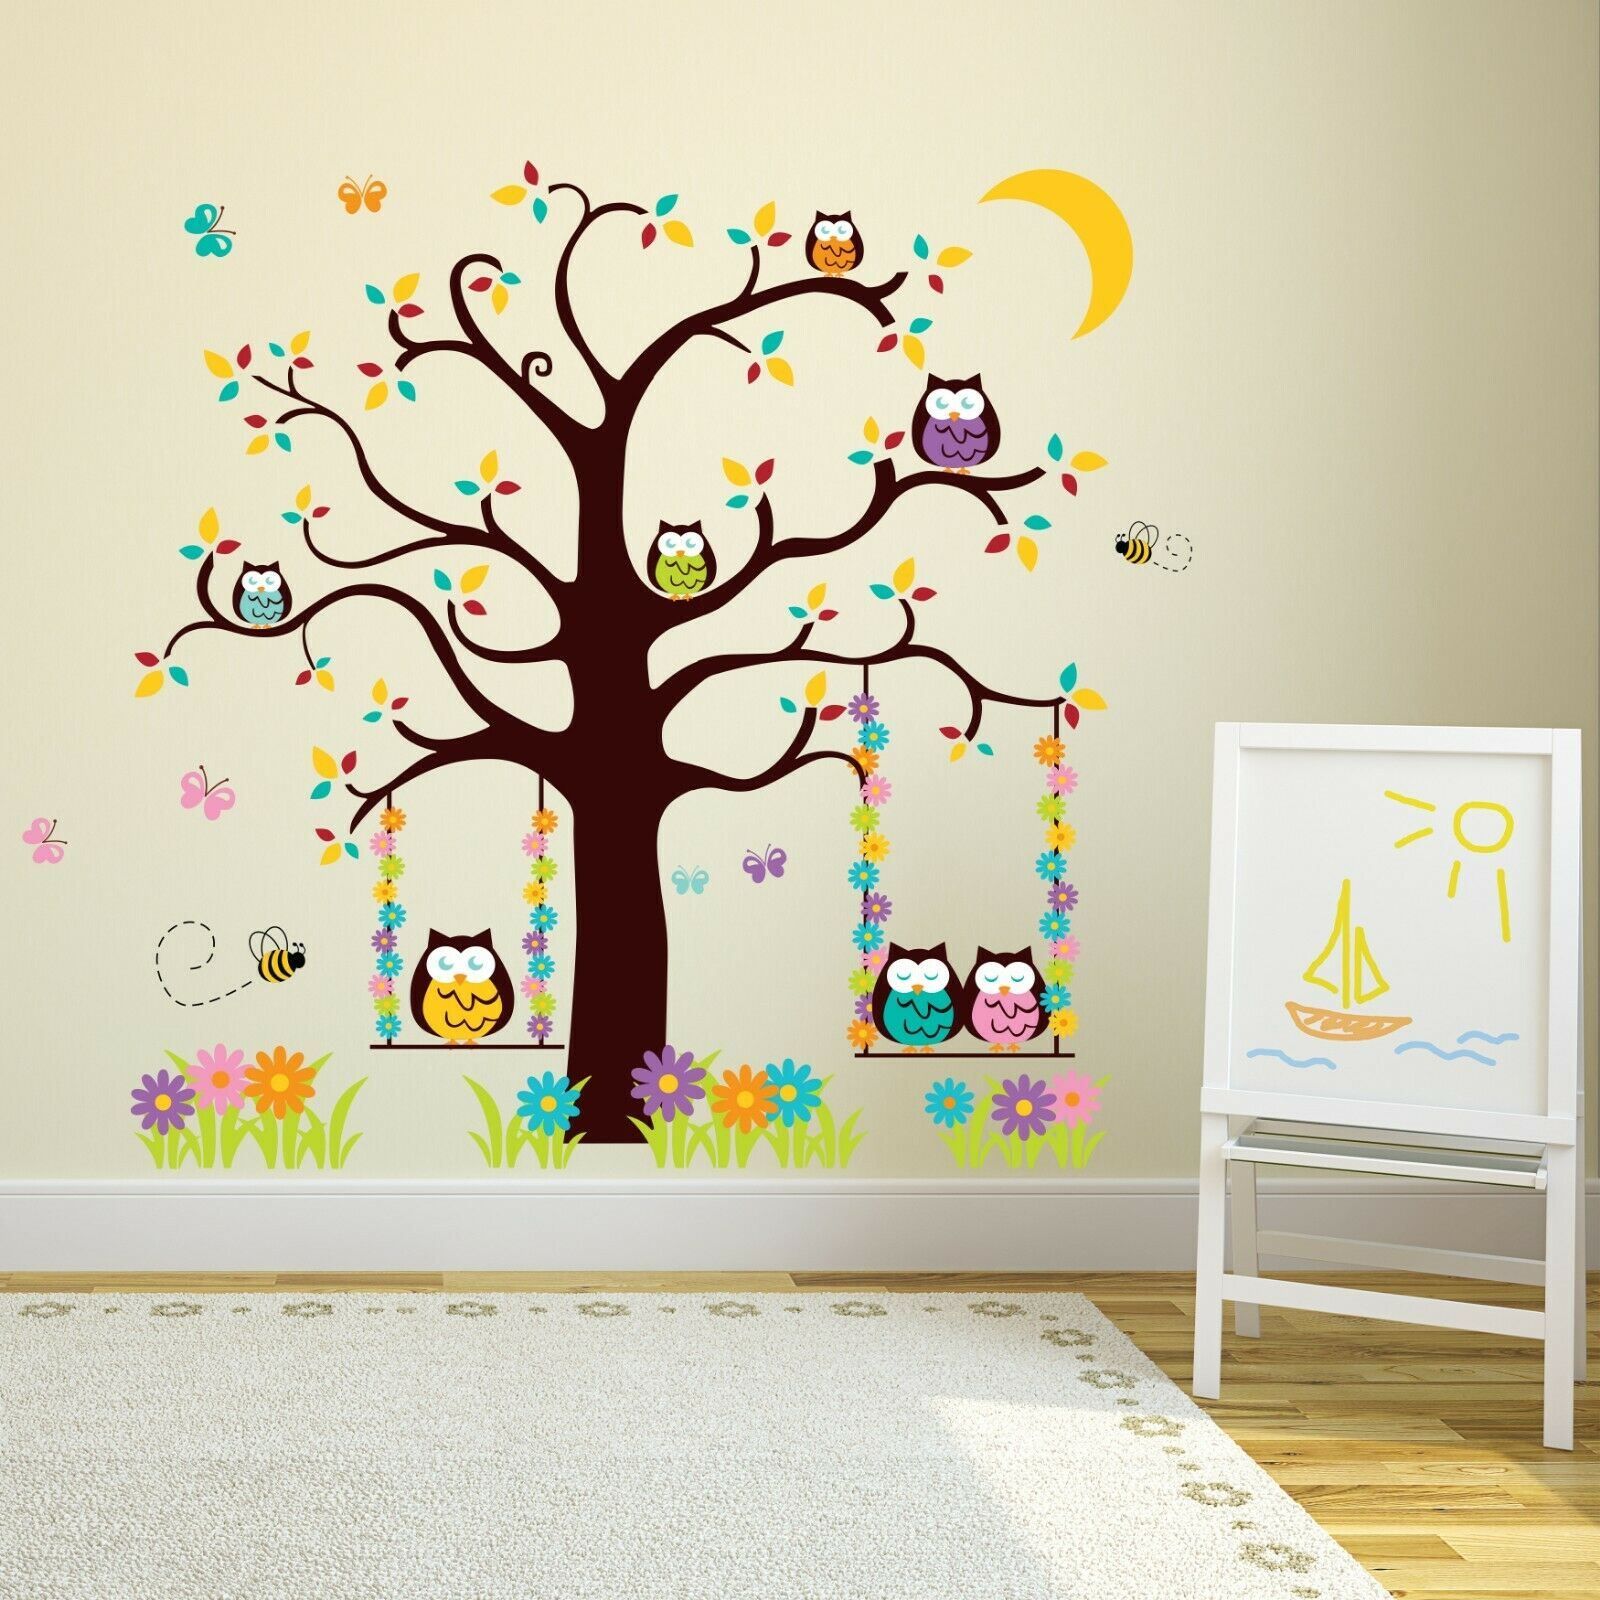 - Transform your room with the stunning Walplus wall sticker collection.
- Walplus' high quality self-adhesive stickers are quick to apply, and can be easily removed and repositioned without damage.
- Simply peel and stick to any smooth, even surface.
- Application instructions included.
- Eco-friendly materials and Non-toxic.